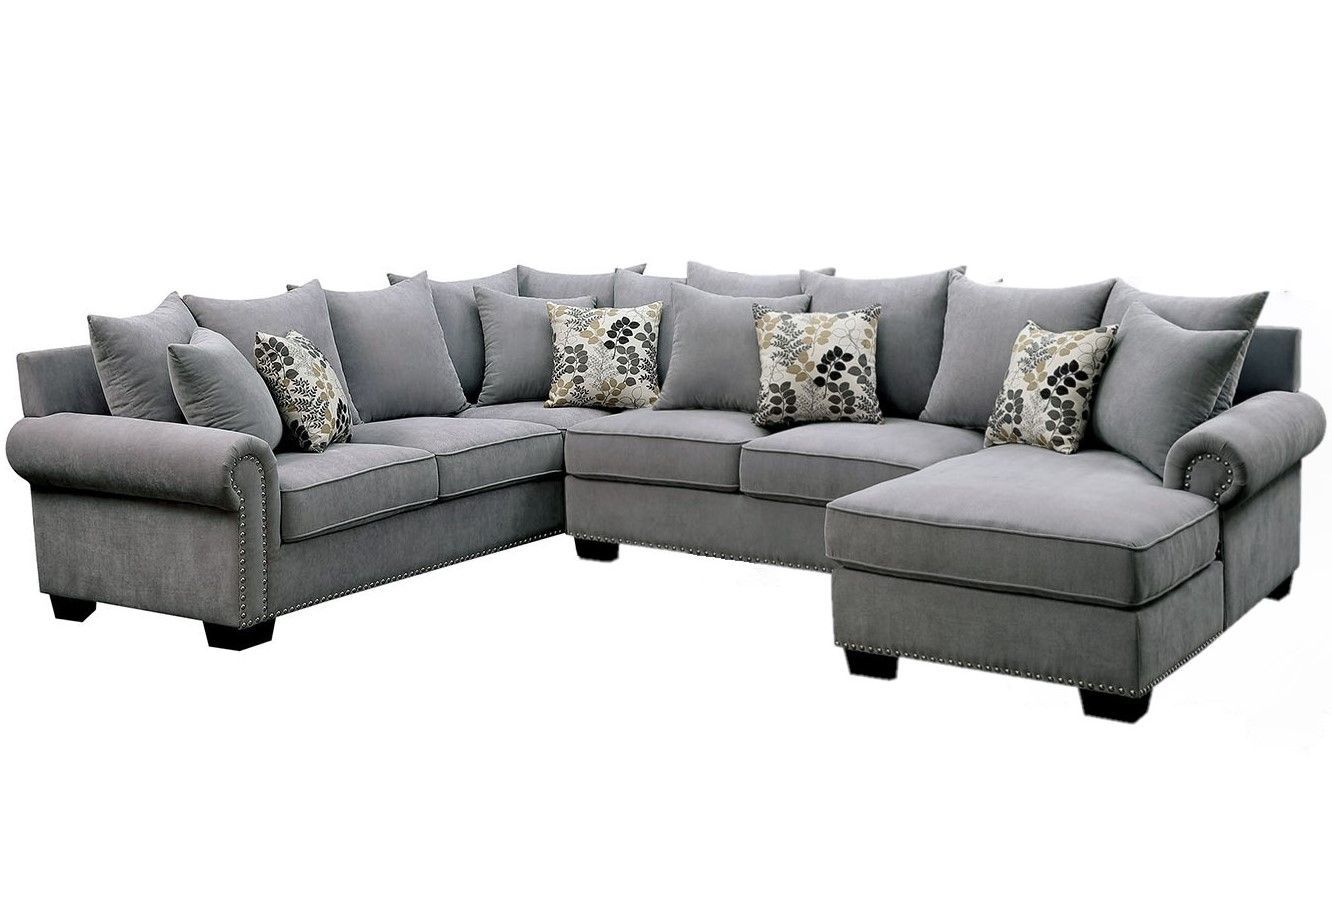 Skyler Ii Transitional Gray Fabric Upholstered Sectional Inside 2pc Polyfiber Sectional Sofas With Nailhead Trims Gray (View 9 of 15)